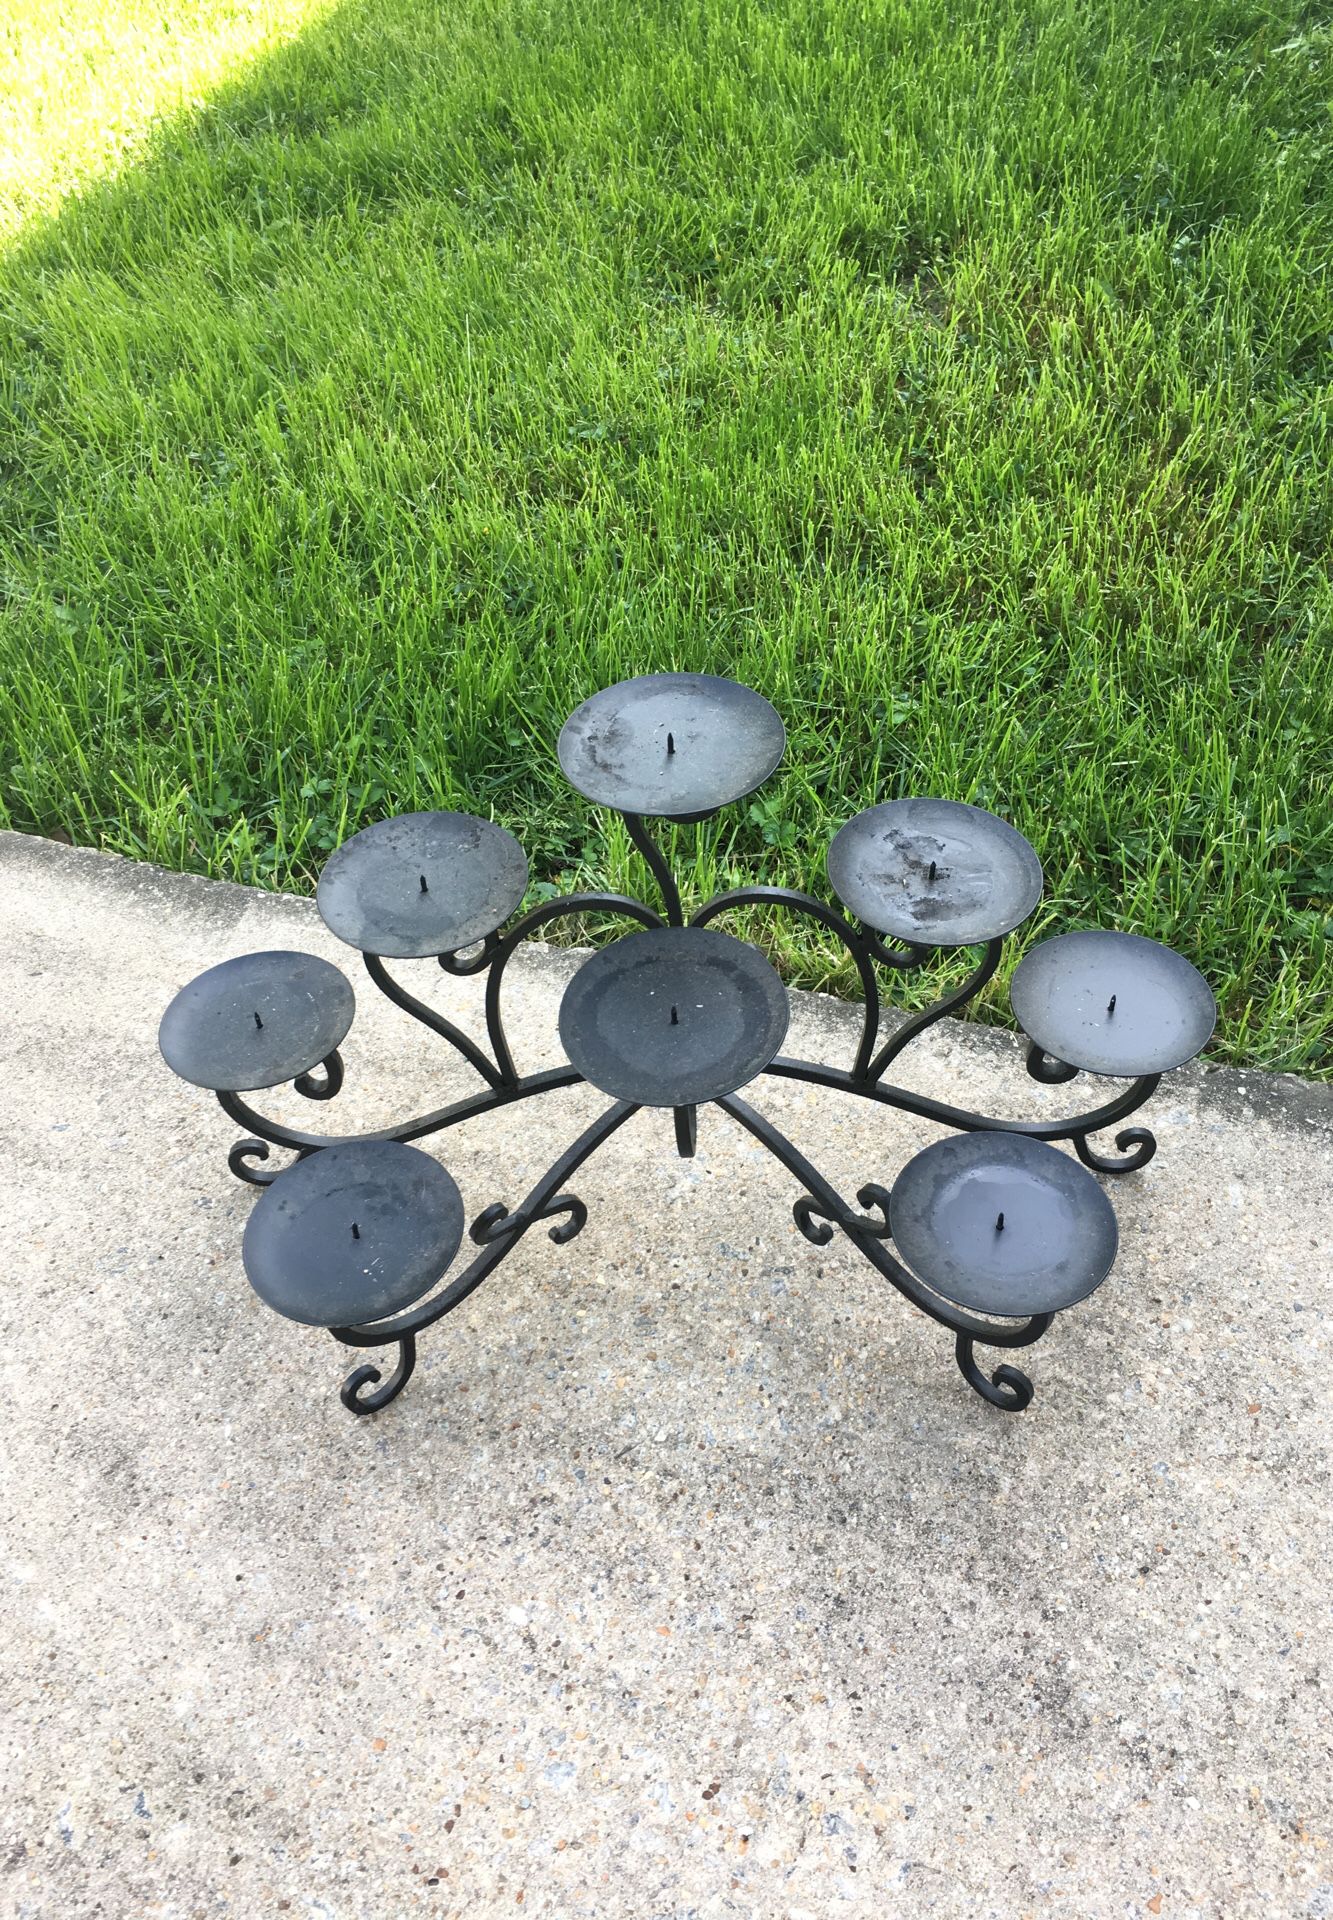 Fireplace candle holder